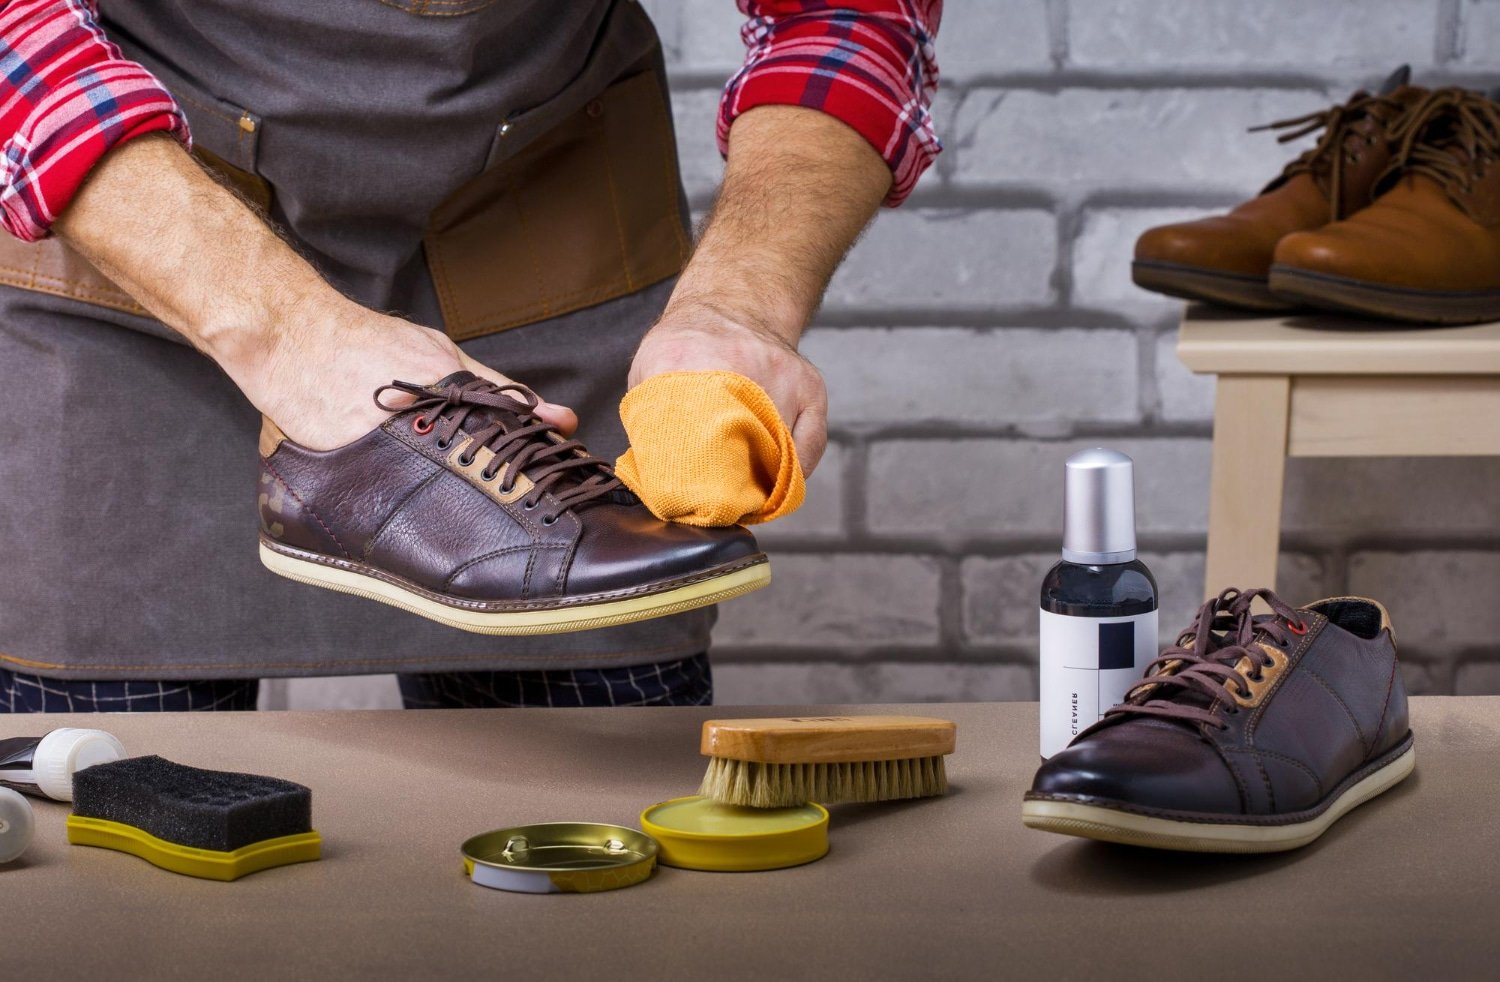 Restore Your Favorite Sneakers With Reshoevn8r’s Advanced Cleaning Solutions